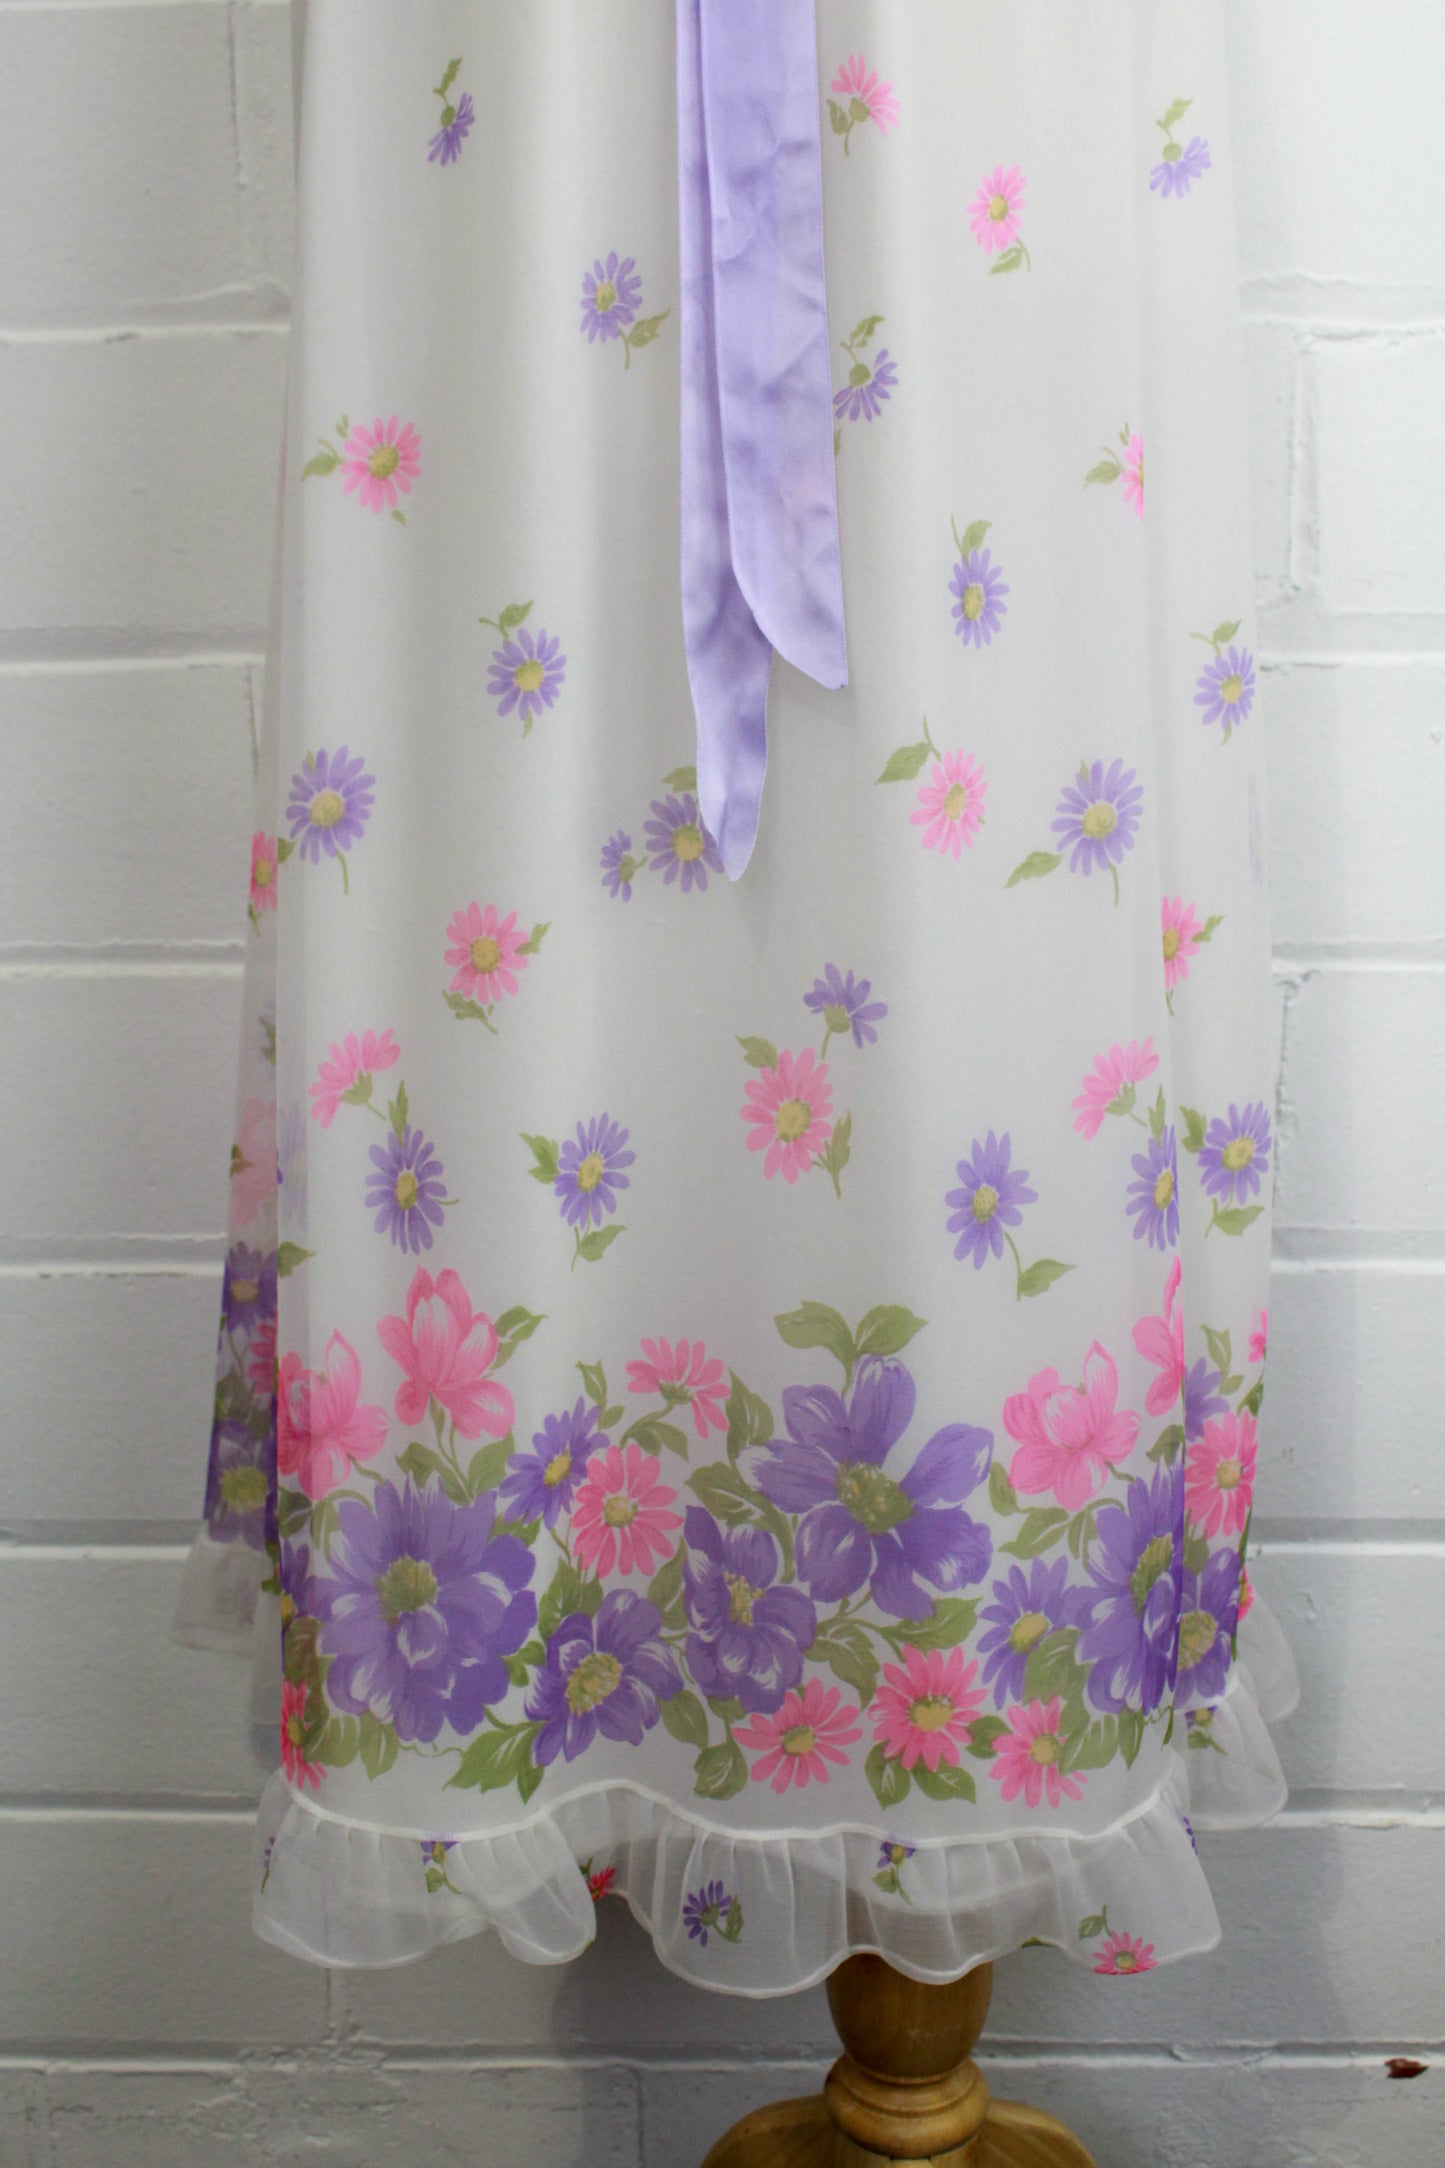 Vintage 1960s/70s White Chiffon with Lilac and Pink Floral Print Maxi Dress, Med